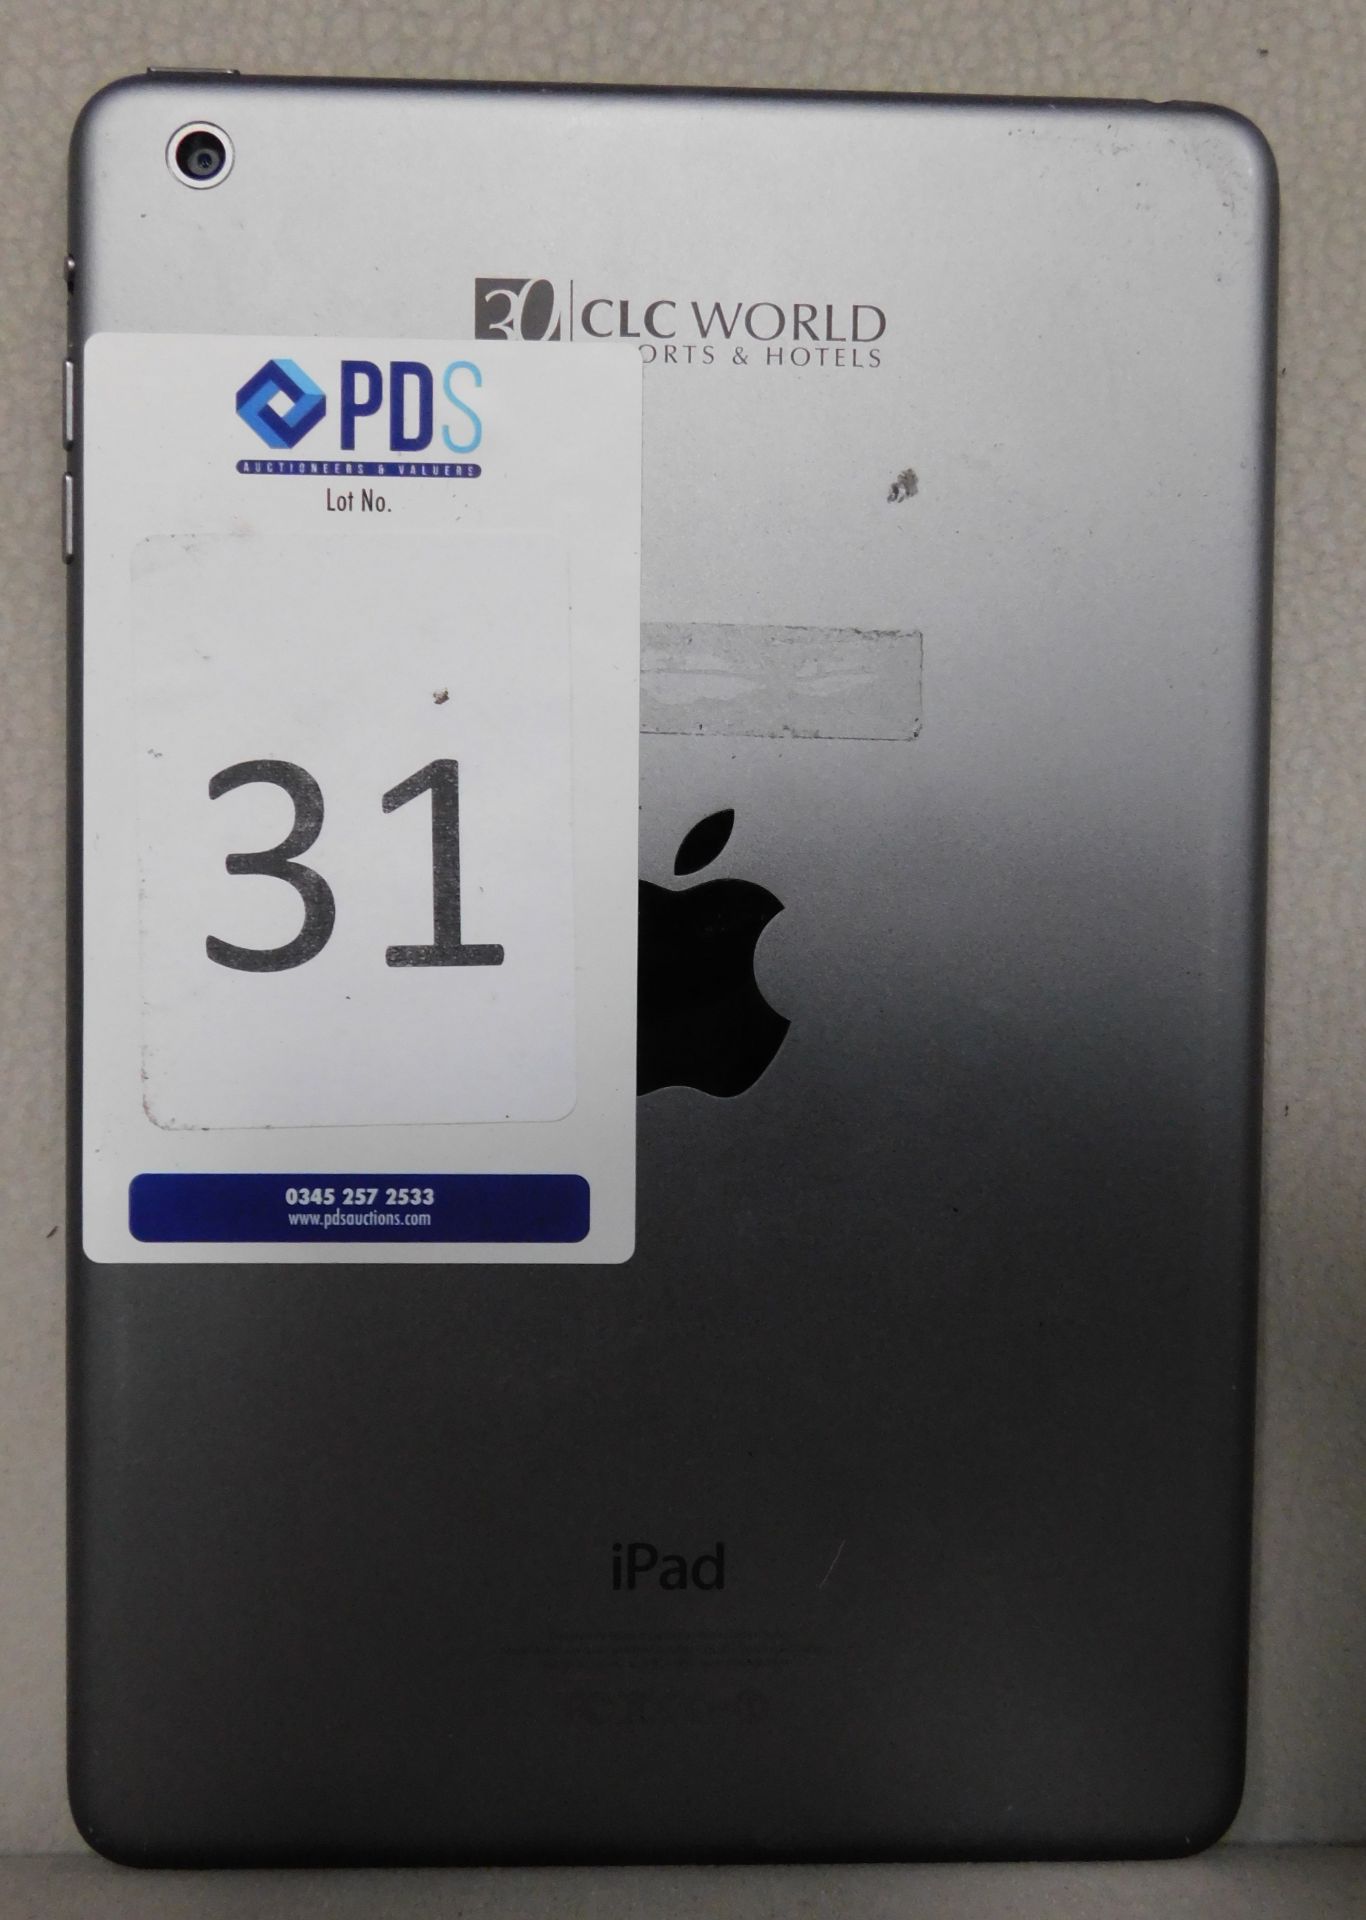 Apple iPad Mini WIFI 16GB Space Grey, Model Number: A1432, Serial Number: F7PMK8E2FP84 (Engraved - Image 2 of 2